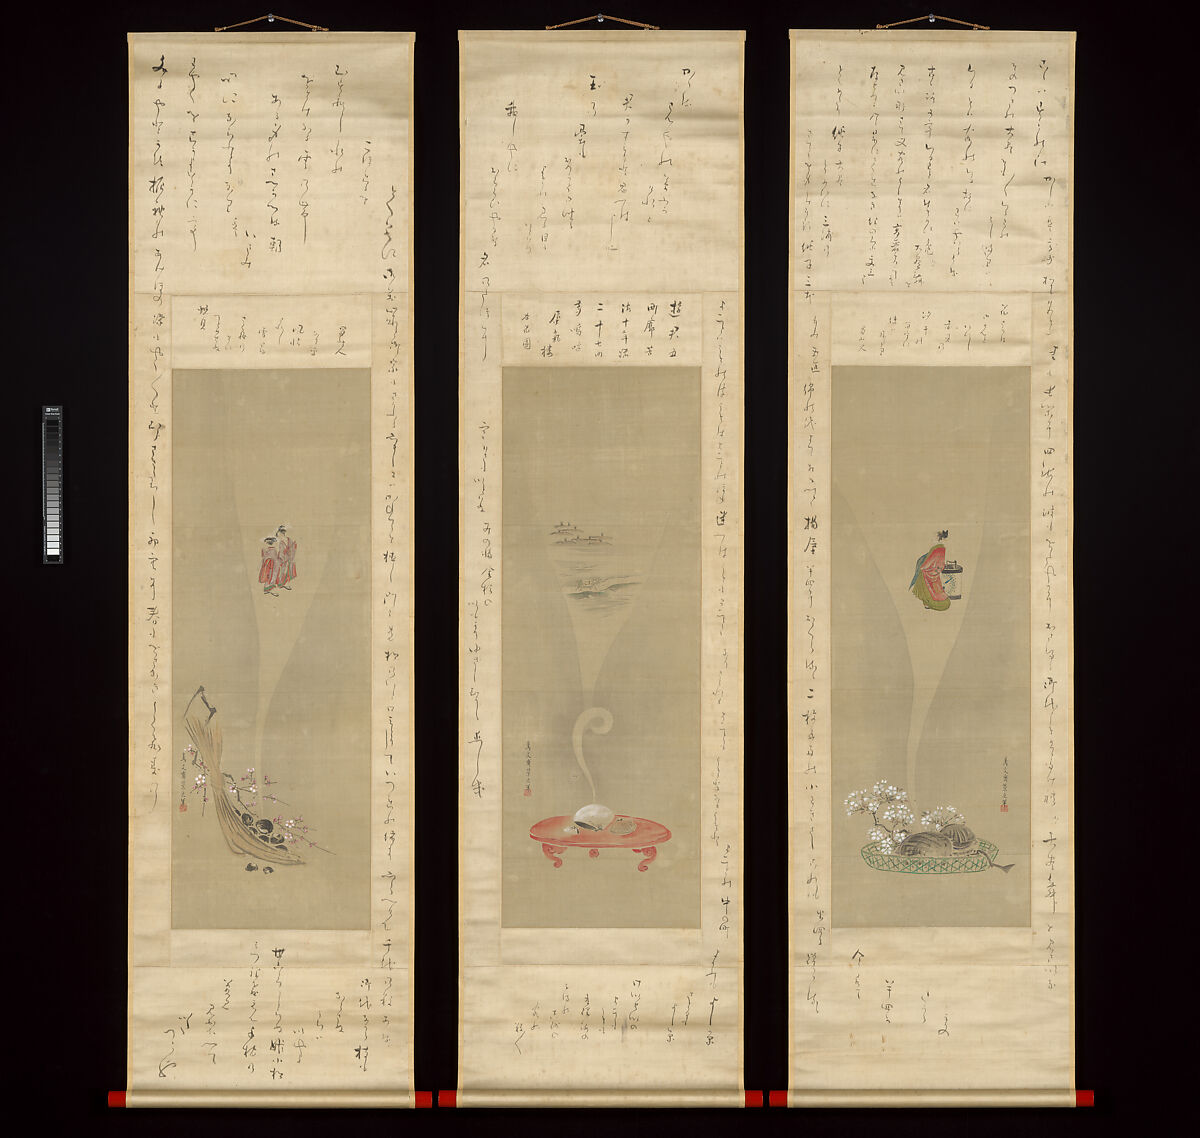 Shellfish and Apparitions of the Yoshiwara Pleasure Quarter, Chōbunsai Eishi, Triptych of hanging scrolls with inscribed mountings; painting: ink and color on silk; calligraphy: ink on silk mounting fabric, Japan